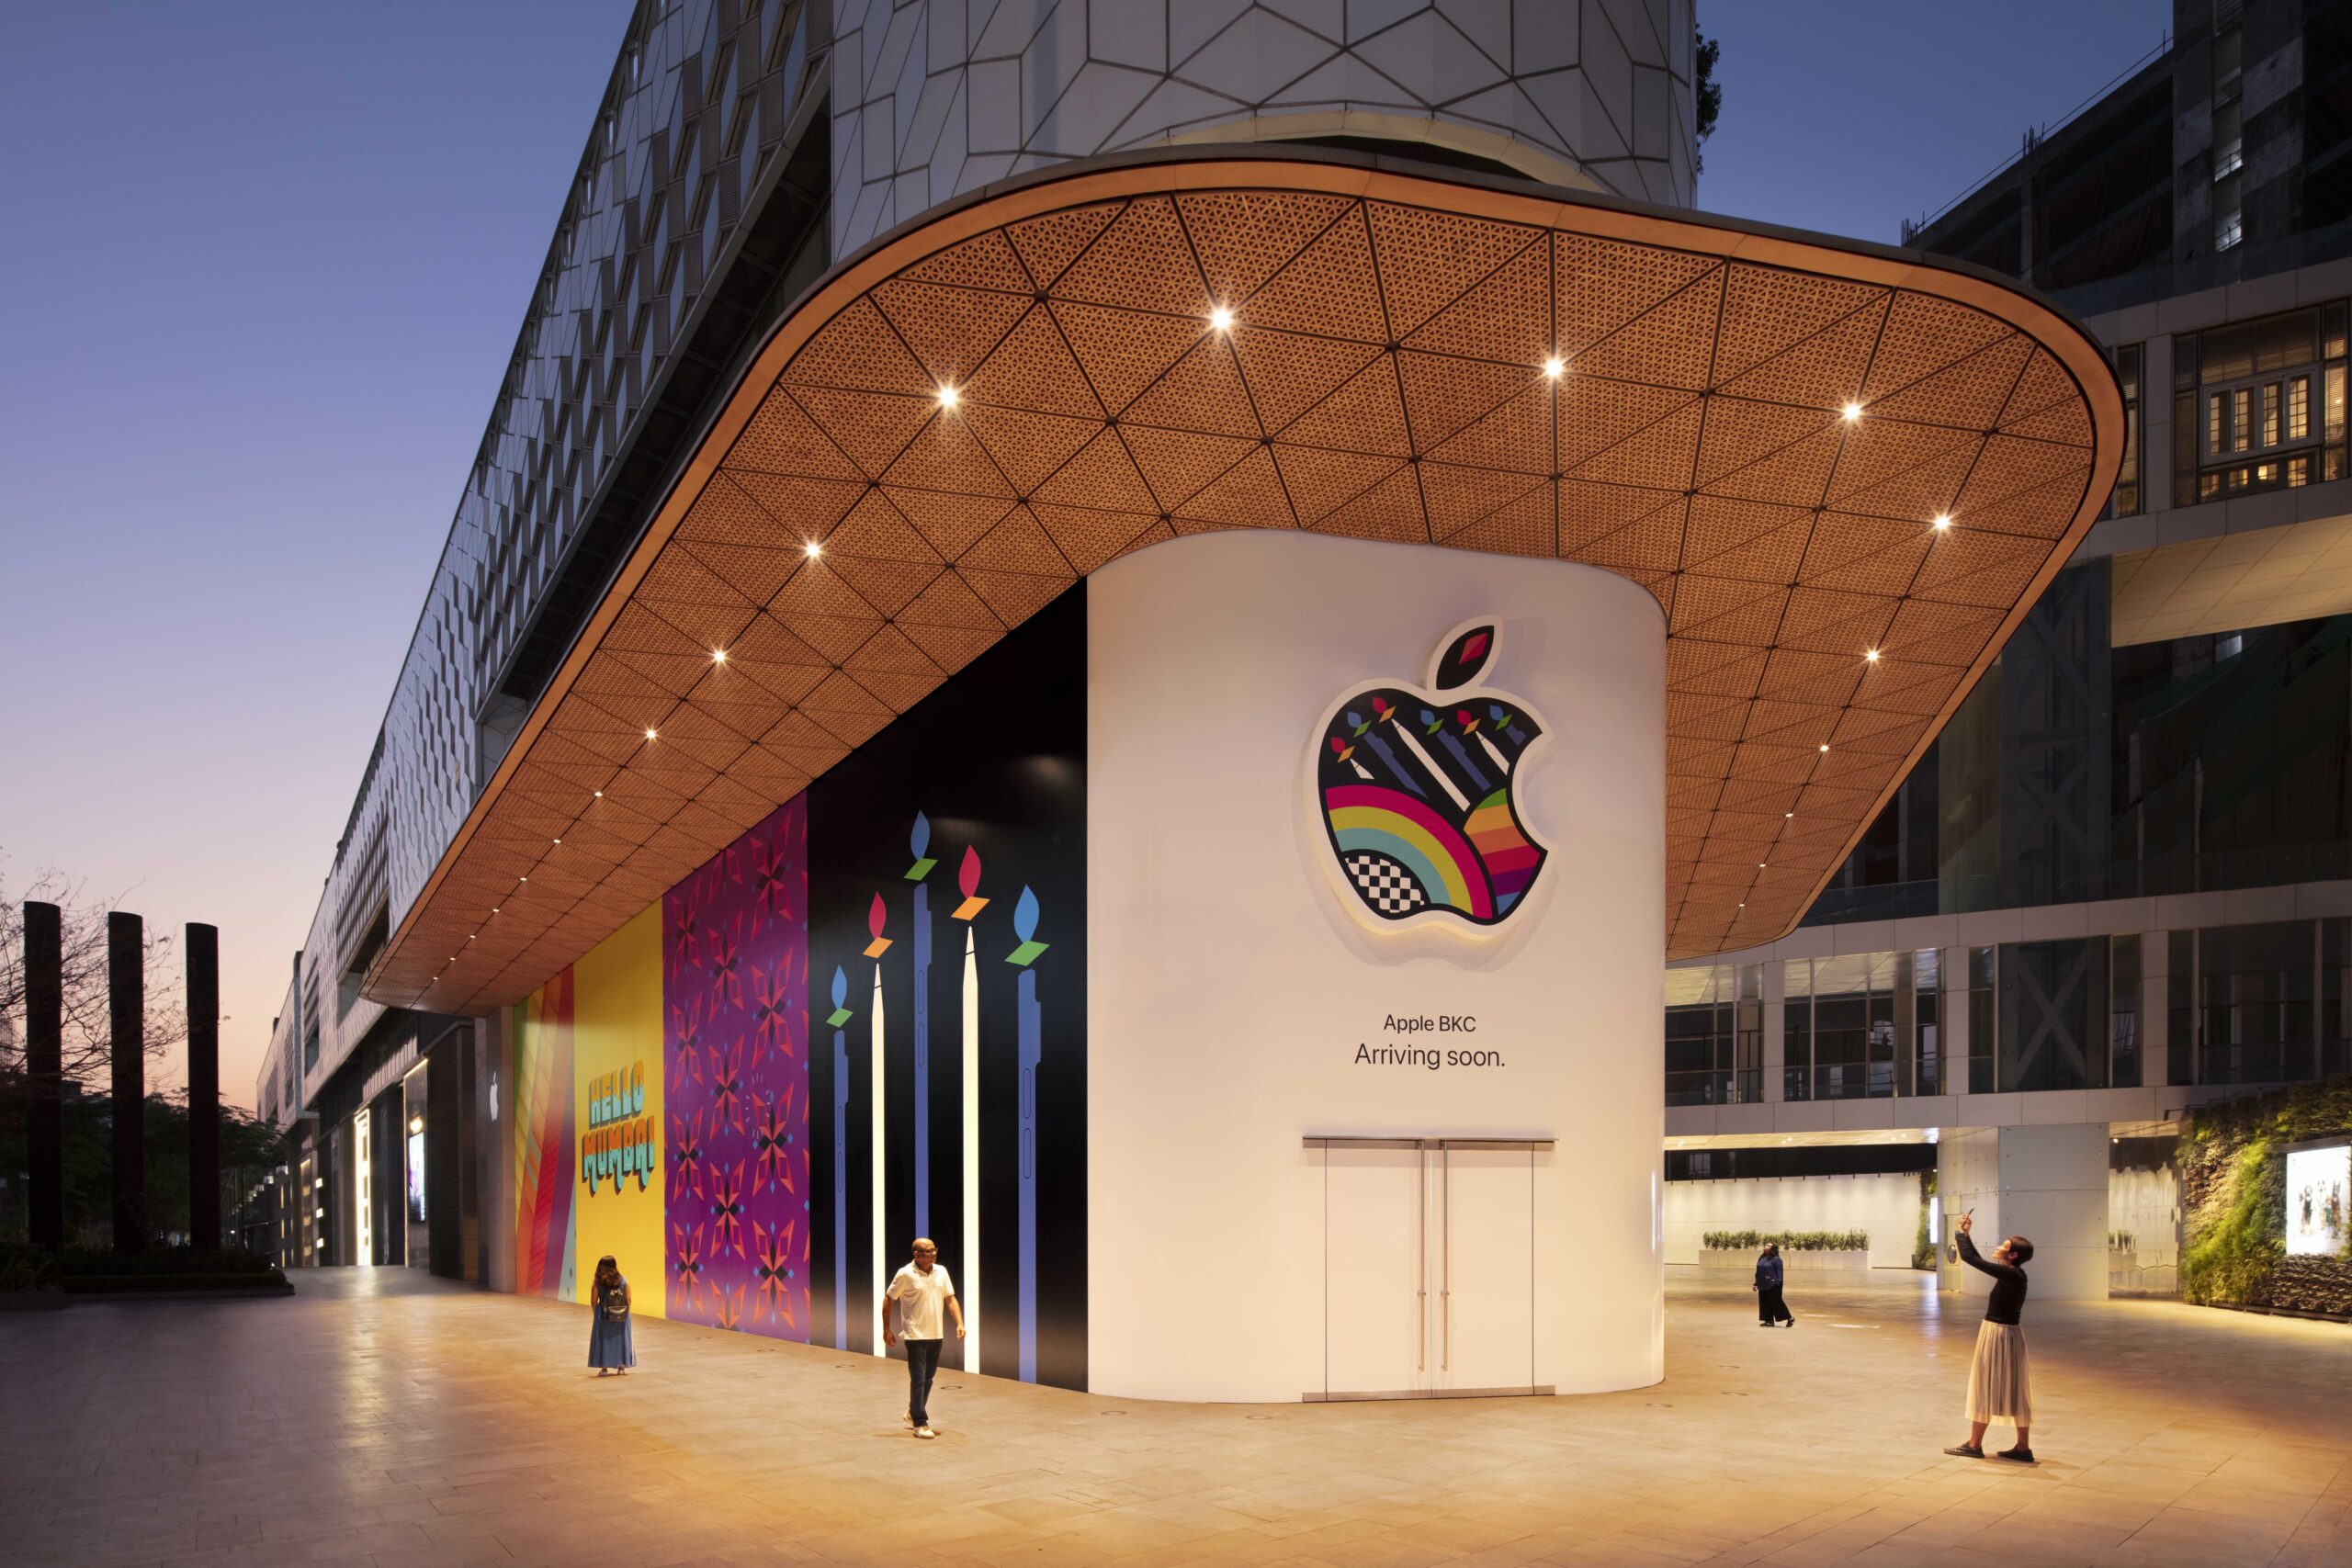 Apple reveals look of its first store in India, inspired by Mumbai’s Kaali Peeli taxi